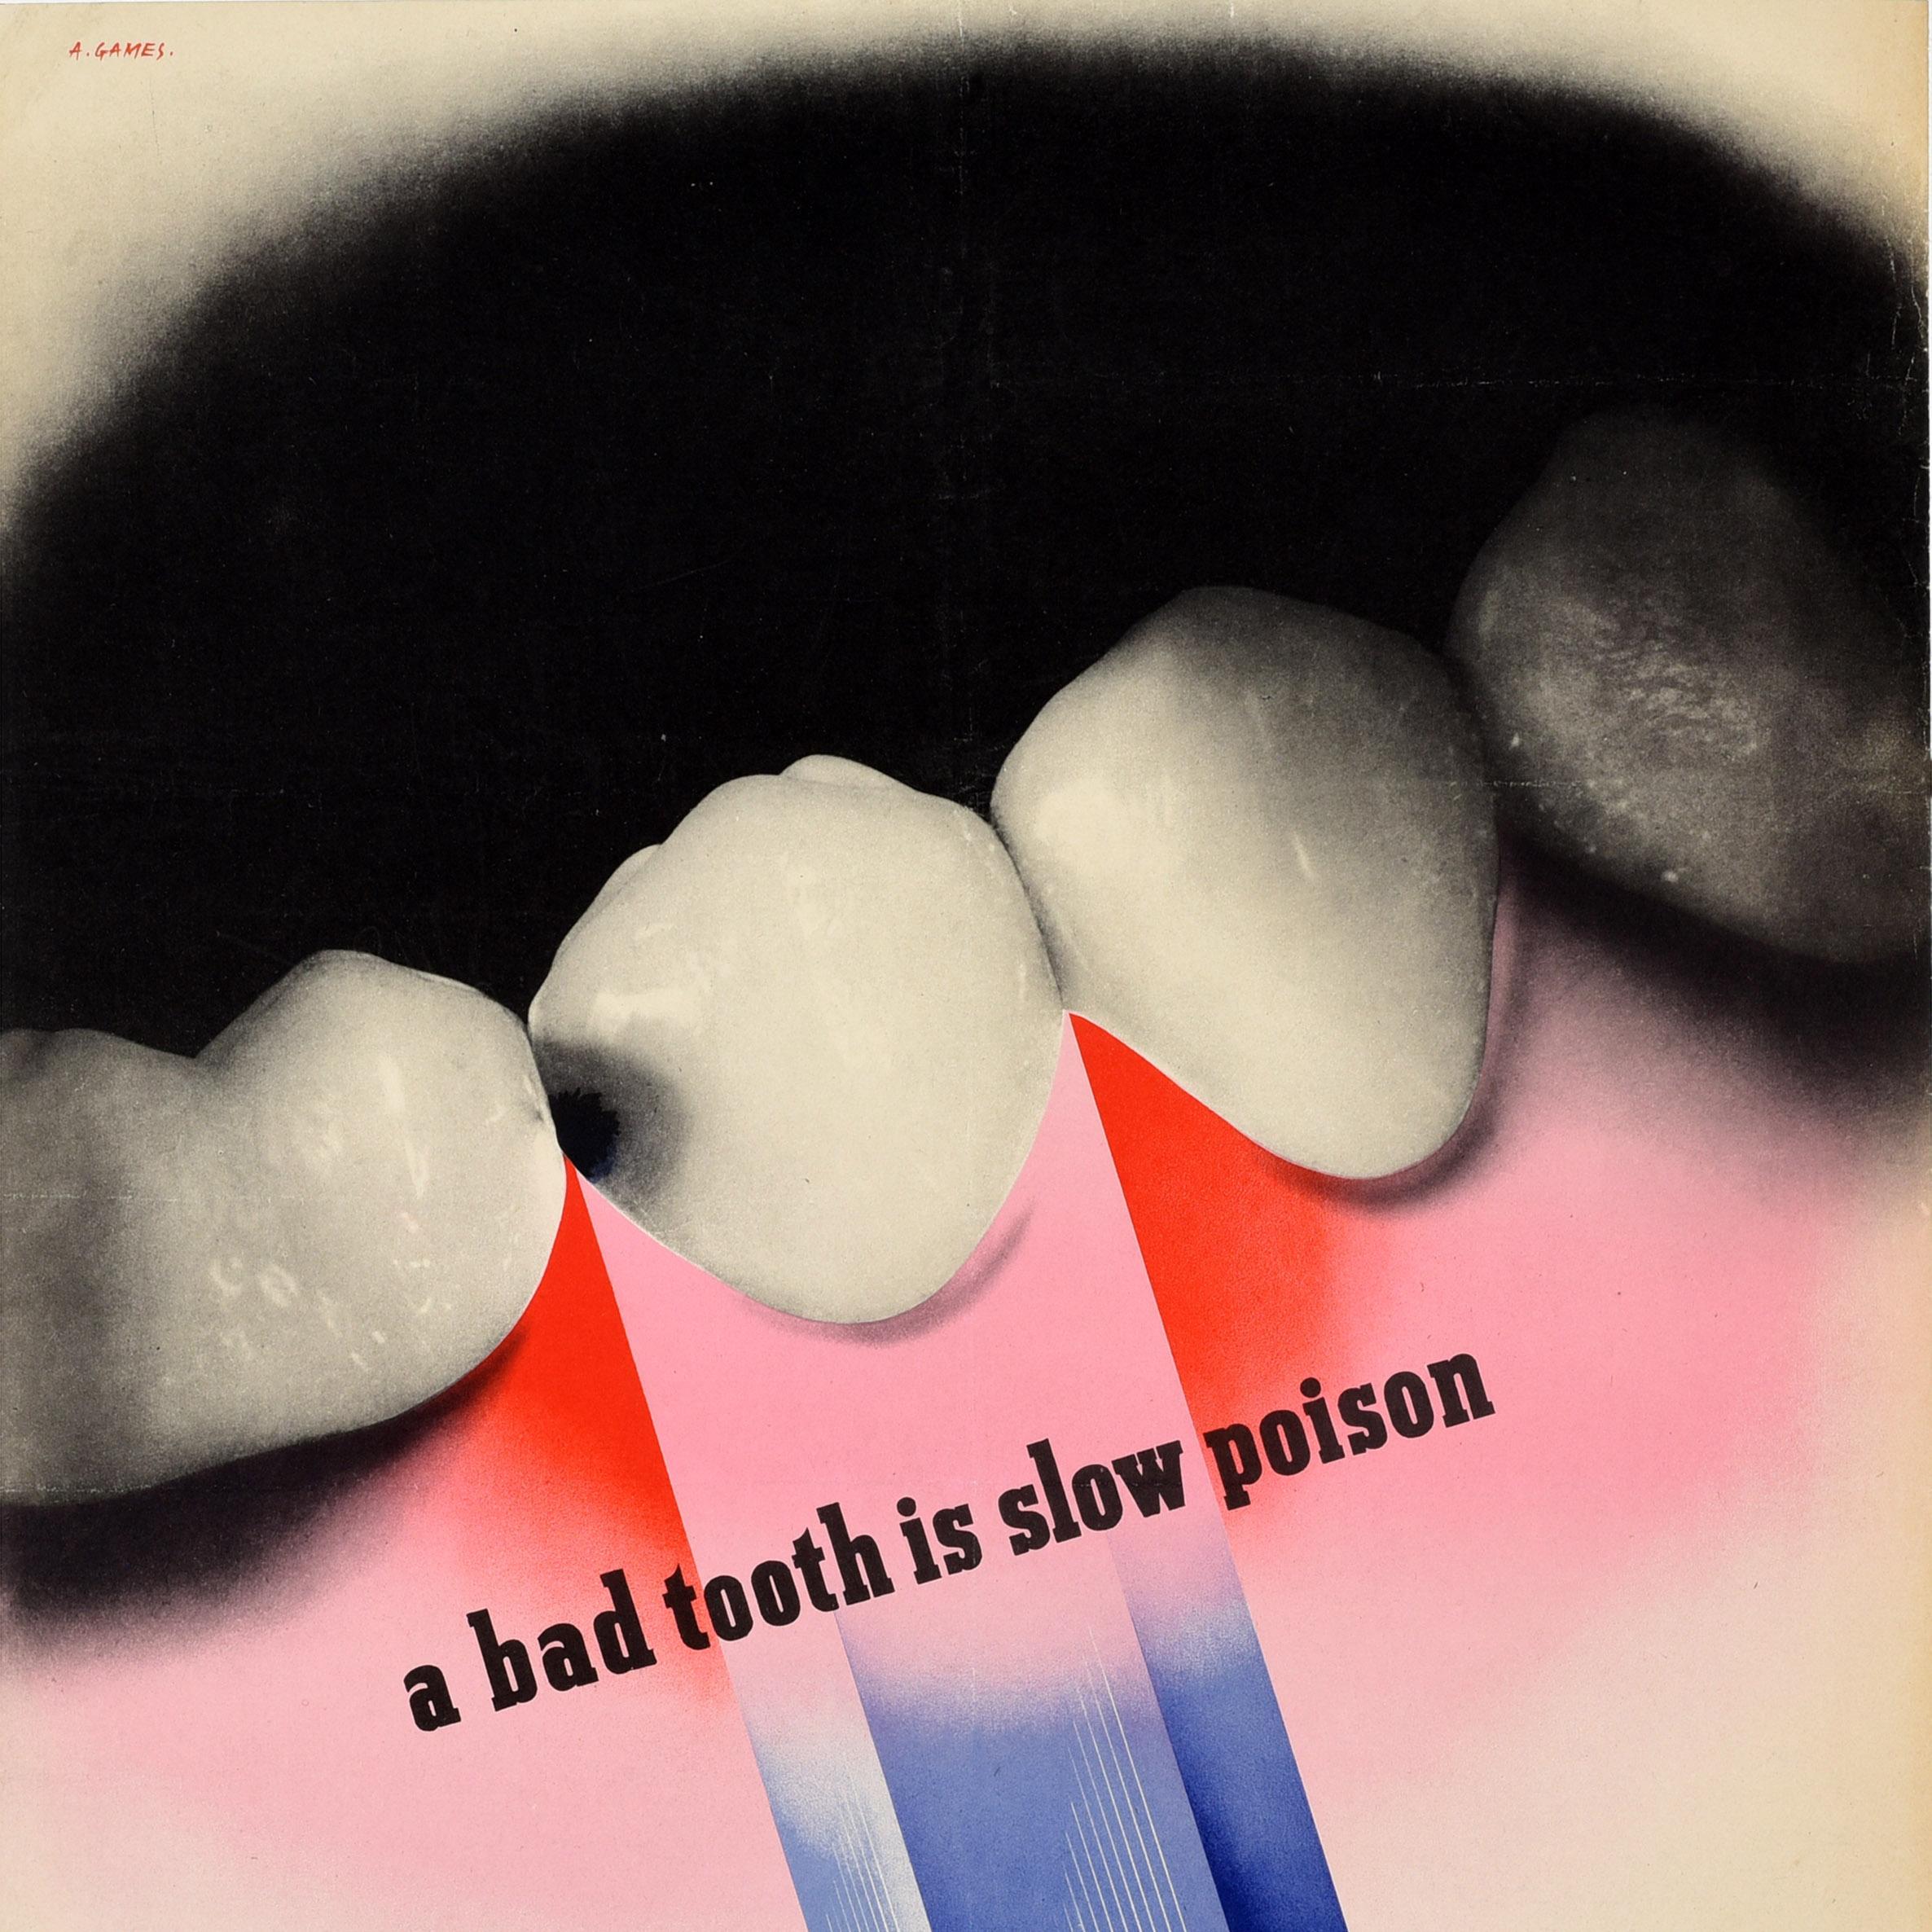 British Original Vintage WWII Military Health Poster Bad Tooth Slow Poison Abram Games For Sale